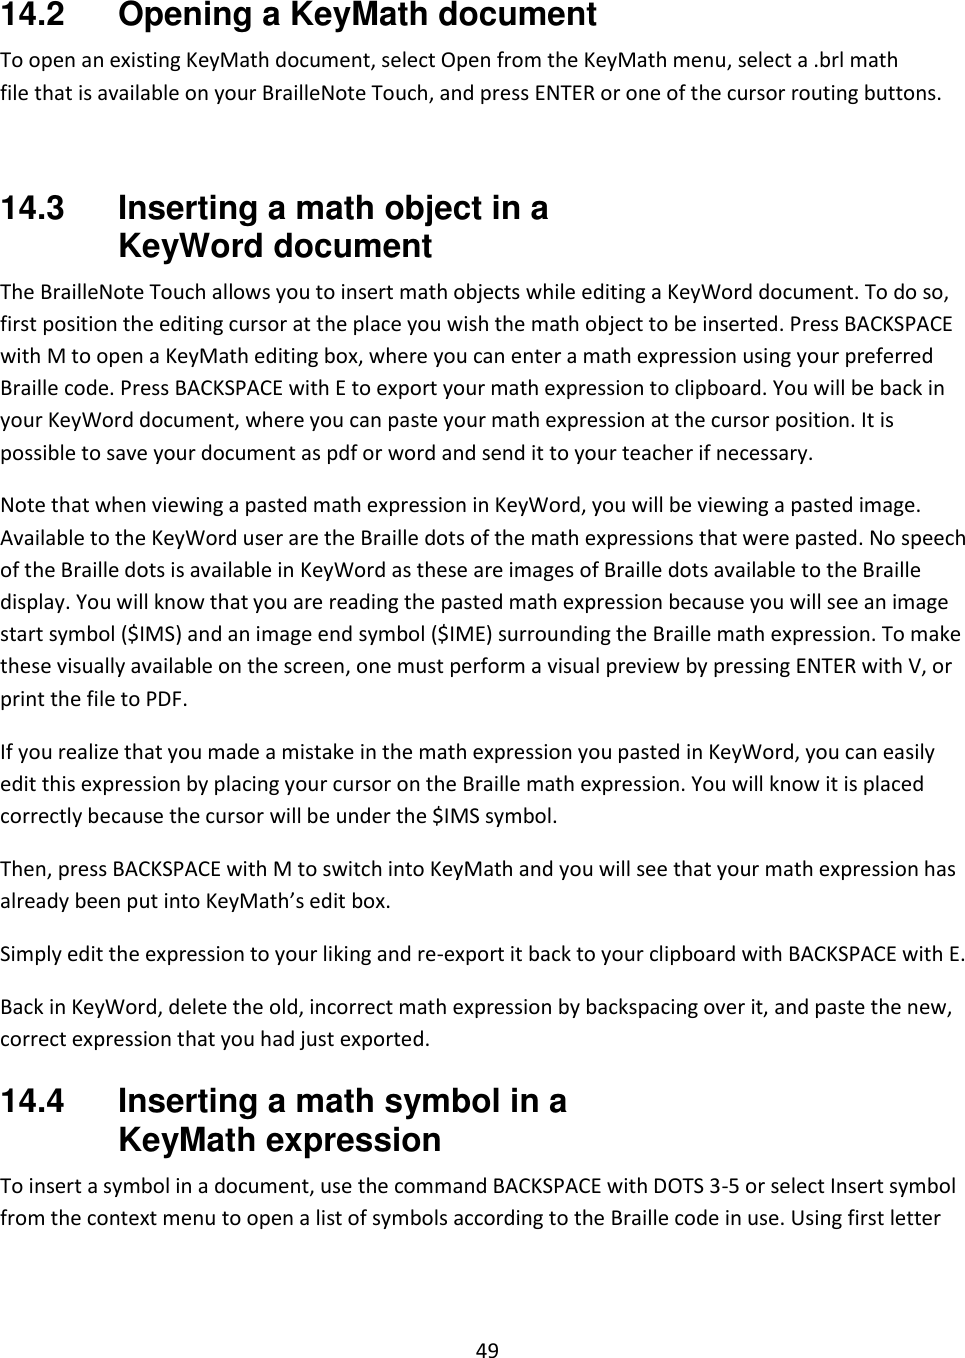 49  14.2  Opening a KeyMath document To open an existing KeyMath document, select Open from the KeyMath menu, select a .brl math file that is available on your BrailleNote Touch, and press ENTER or one of the cursor routing buttons.   14.3  Inserting a math object in a KeyWord document The BrailleNote Touch allows you to insert math objects while editing a KeyWord document. To do so, first position the editing cursor at the place you wish the math object to be inserted. Press BACKSPACE with M to open a KeyMath editing box, where you can enter a math expression using your preferred Braille code. Press BACKSPACE with E to export your math expression to clipboard. You will be back in your KeyWord document, where you can paste your math expression at the cursor position. It is possible to save your document as pdf or word and send it to your teacher if necessary.  Note that when viewing a pasted math expression in KeyWord, you will be viewing a pasted image. Available to the KeyWord user are the Braille dots of the math expressions that were pasted. No speech of the Braille dots is available in KeyWord as these are images of Braille dots available to the Braille display. You will know that you are reading the pasted math expression because you will see an image start symbol ($IMS) and an image end symbol ($IME) surrounding the Braille math expression. To make these visually available on the screen, one must perform a visual preview by pressing ENTER with V, or print the file to PDF. If you realize that you made a mistake in the math expression you pasted in KeyWord, you can easily edit this expression by placing your cursor on the Braille math expression. You will know it is placed correctly because the cursor will be under the $IMS symbol.  Then, press BACKSPACE with M to switch into KeyMath and you will see that your math expression has already been put into KeyMath’s edit box. Simply edit the expression to your liking and re-export it back to your clipboard with BACKSPACE with E. Back in KeyWord, delete the old, incorrect math expression by backspacing over it, and paste the new, correct expression that you had just exported. 14.4  Inserting a math symbol in a KeyMath expression To insert a symbol in a document, use the command BACKSPACE with DOTS 3-5 or select Insert symbol from the context menu to open a list of symbols according to the Braille code in use. Using first letter 